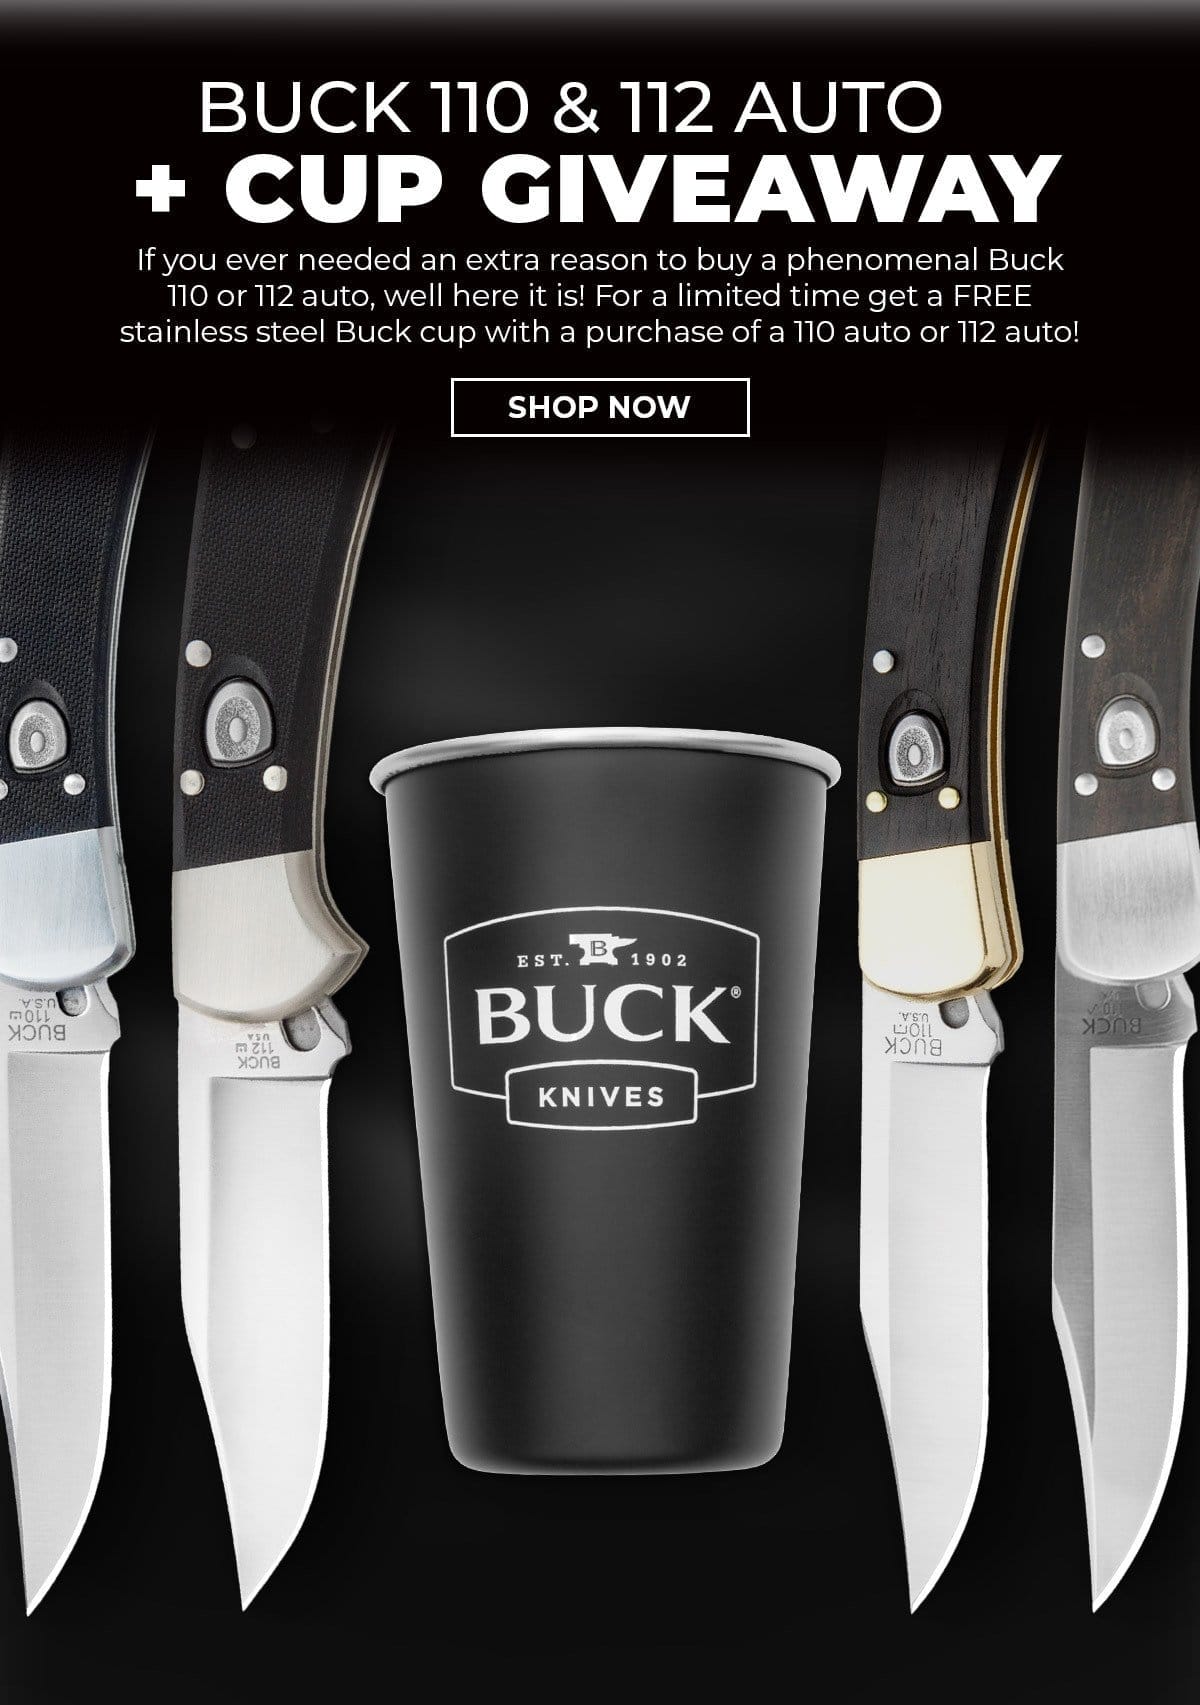 Buck 110 & 112 Auto + cup giveaway